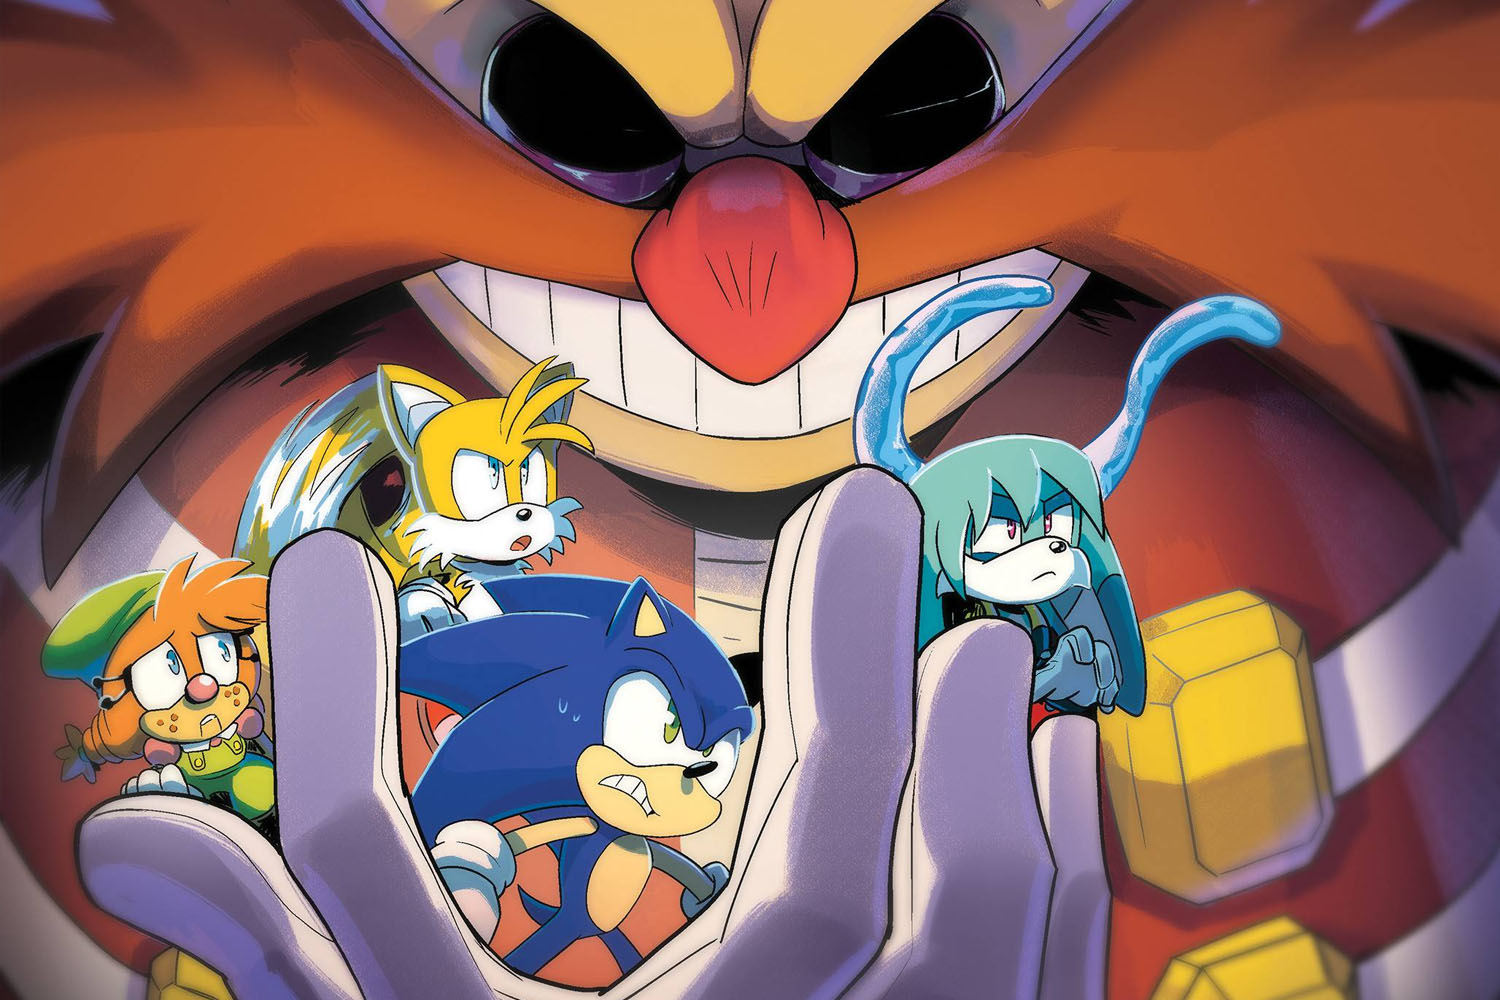 'Sonic The Hedgehog' #52 review